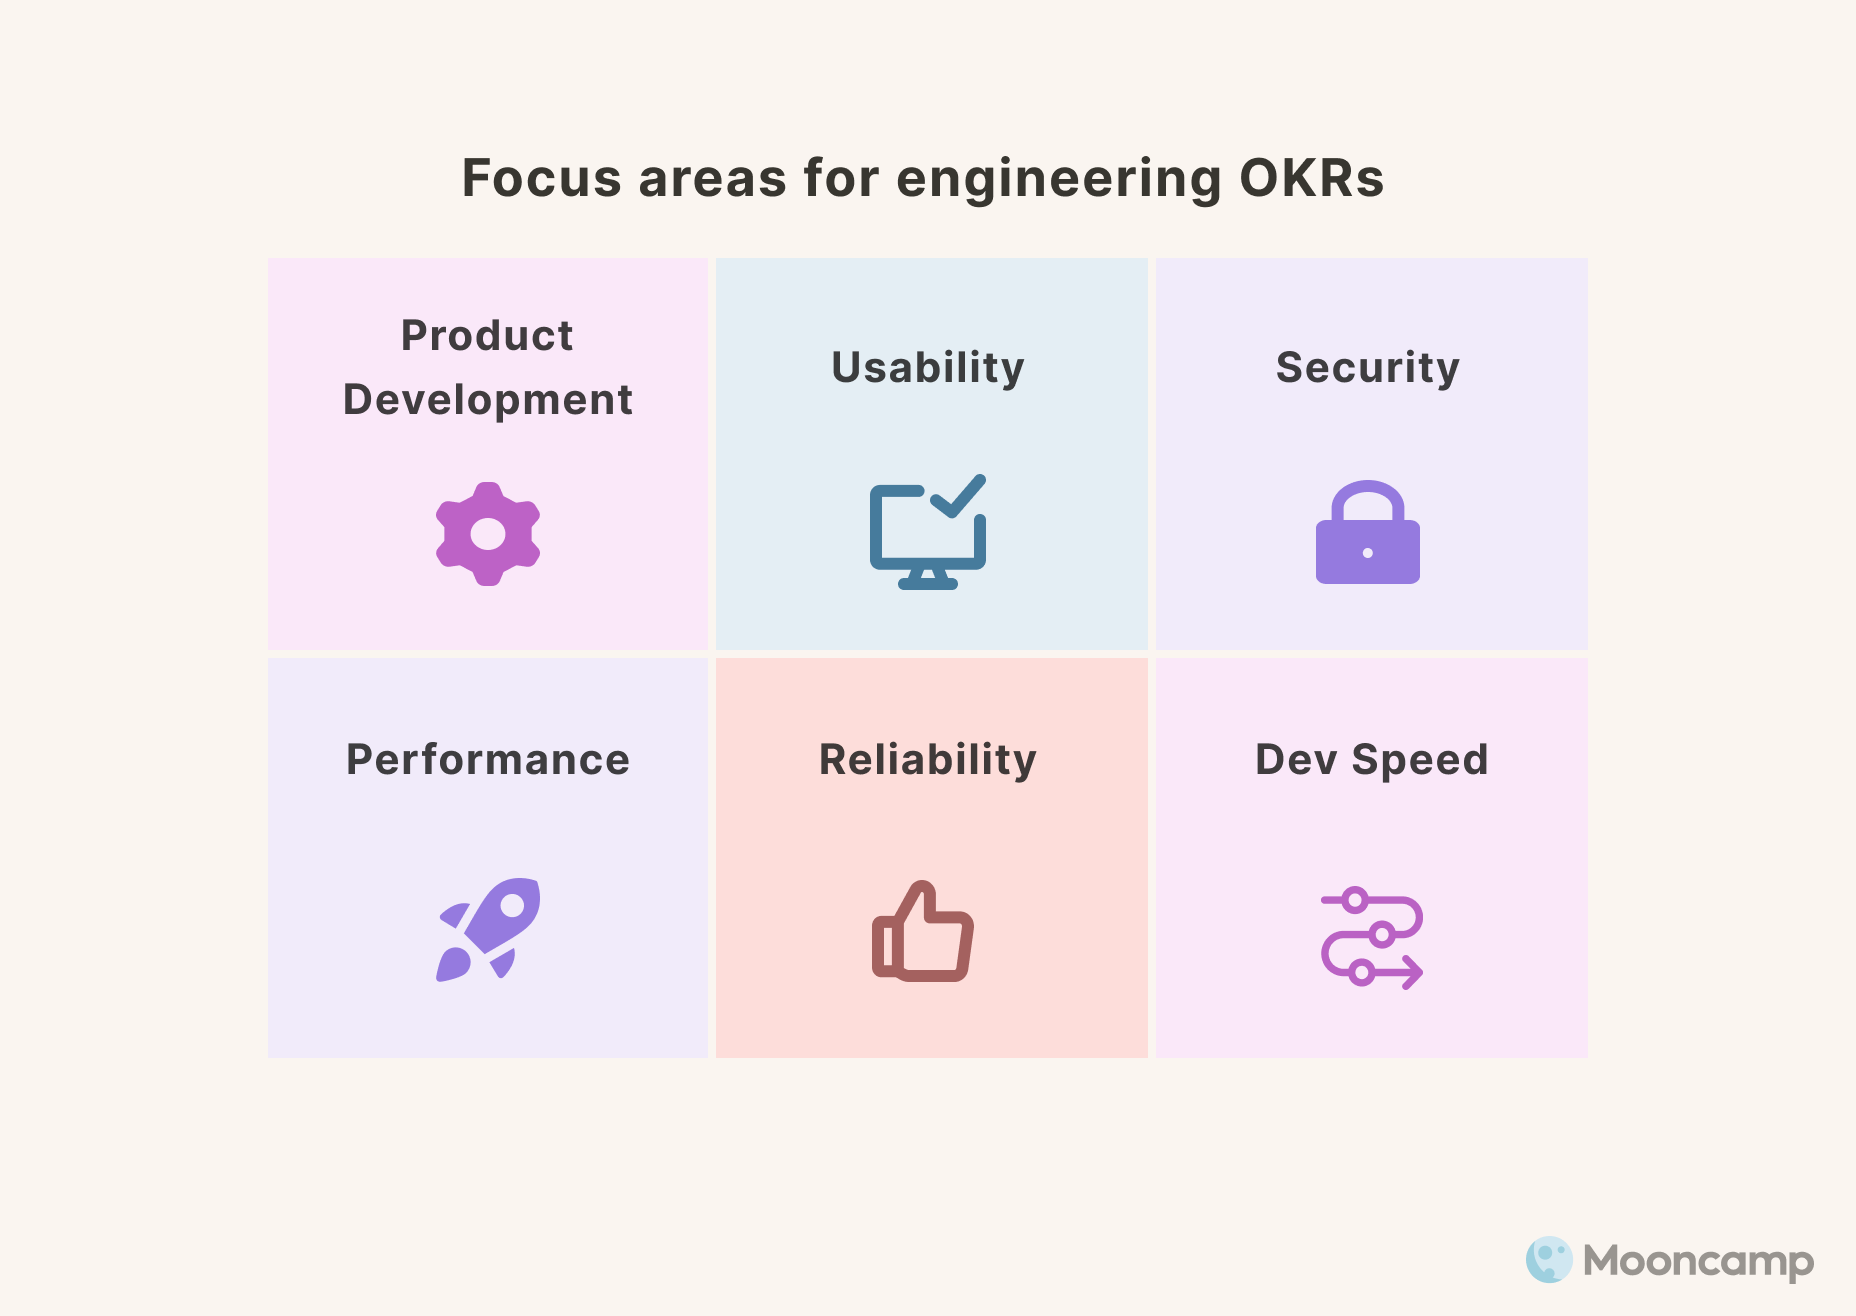 Focus areas for engineering OKRs